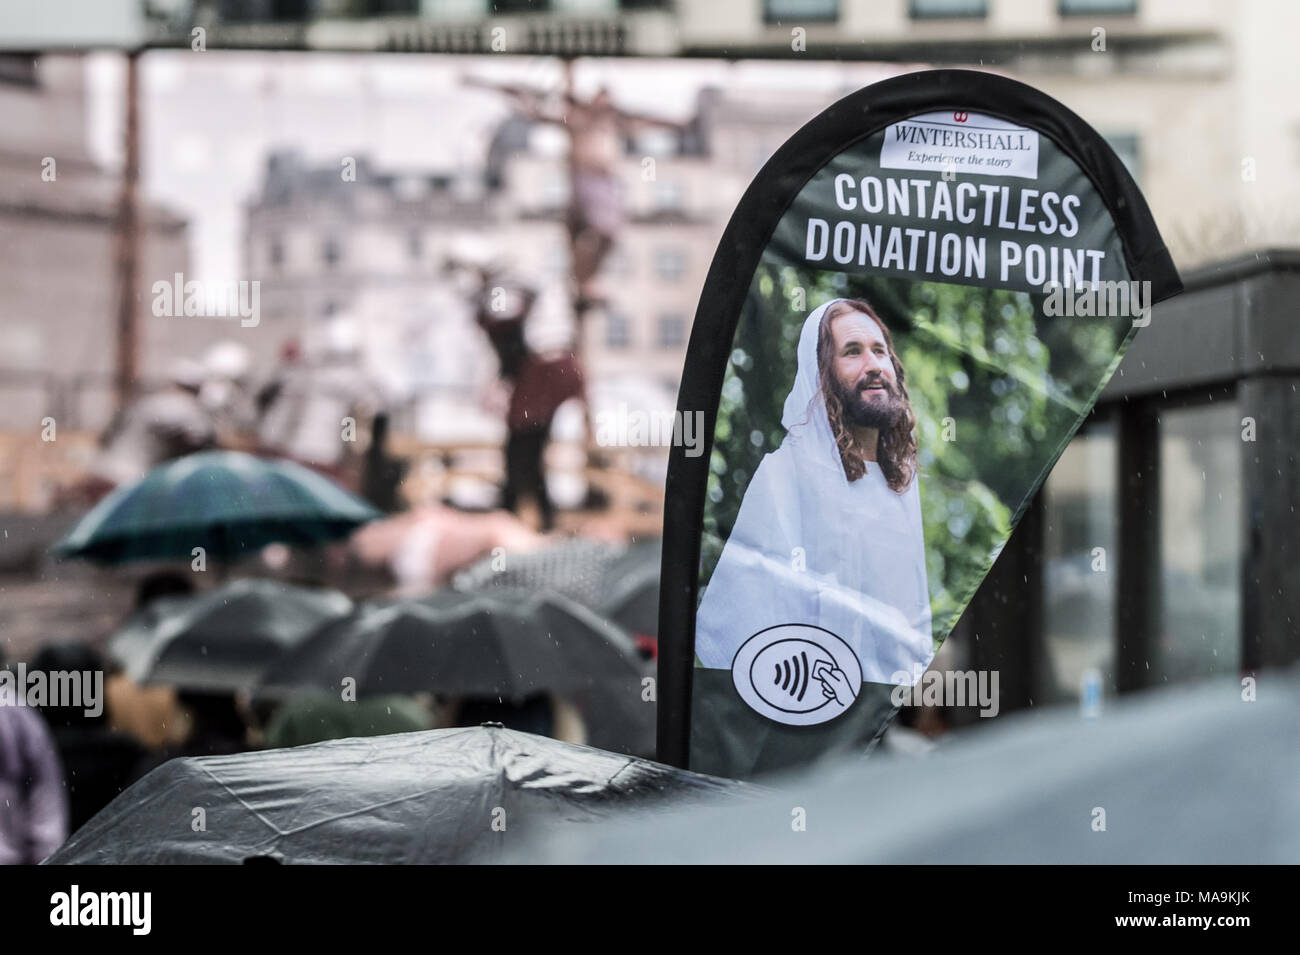 London, UK. 30th March, 2018. James Burke-Dunsmore as Jesus in the annual open-air performance of 'The Passion of Jesus' by the Wintershall Players on a rainy Easter Good Friday bank holiday in Trafalgar Square. Credit: Guy Corbishley/Alamy Live News Stock Photo